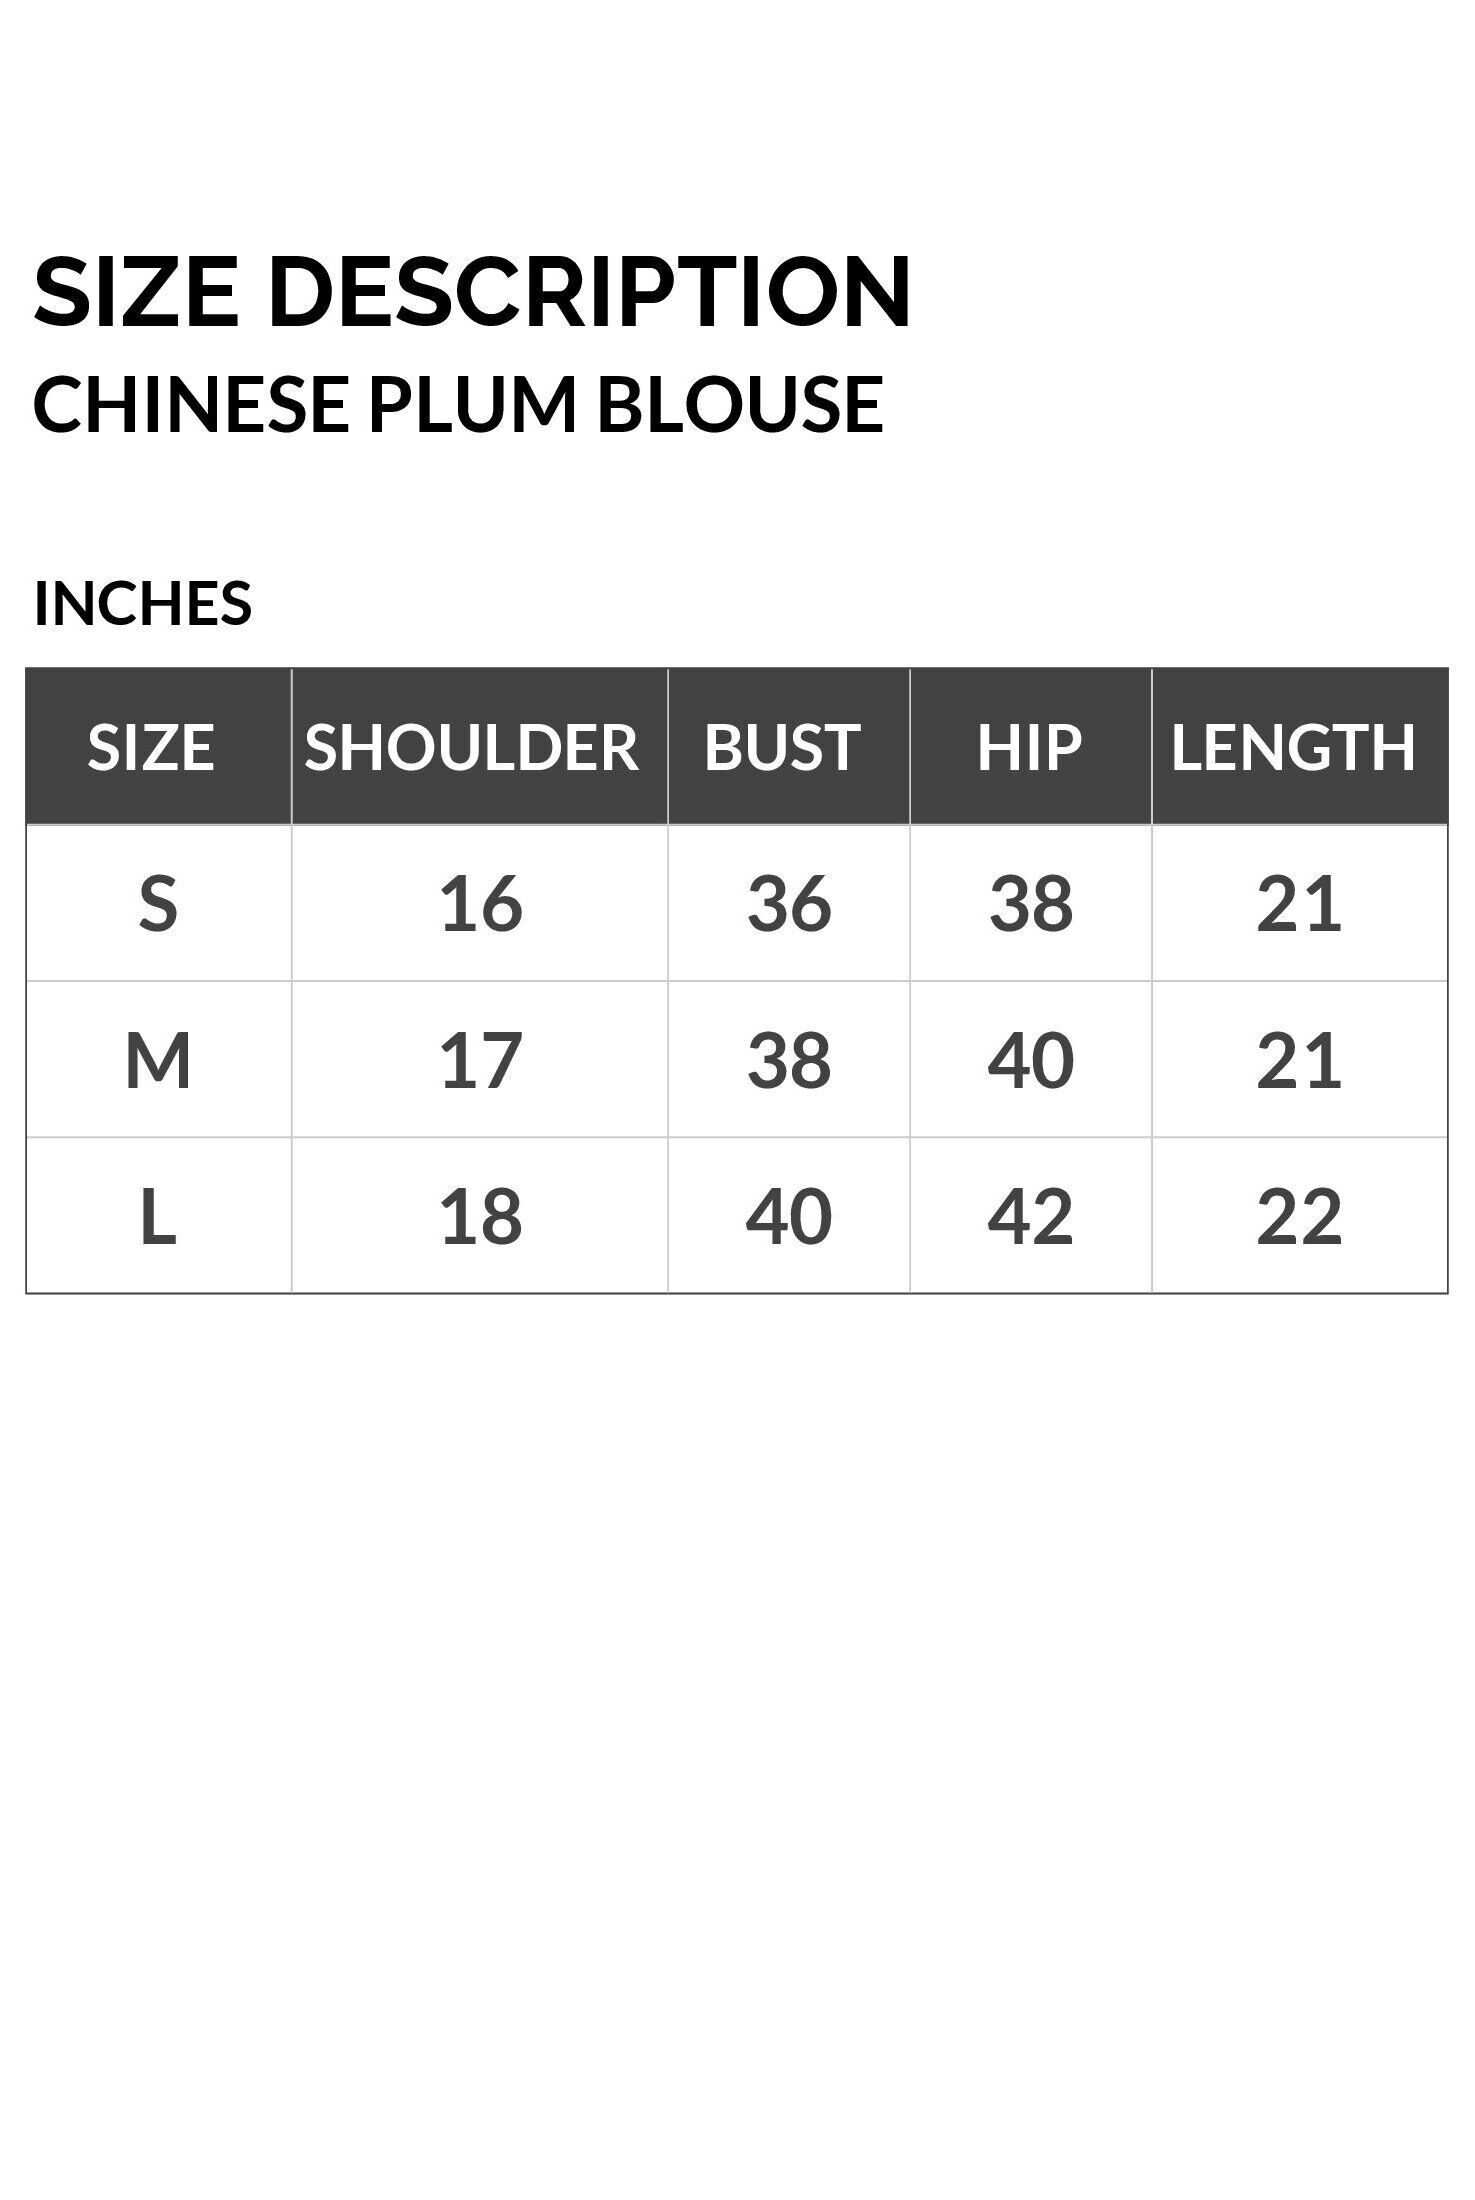 SIZE CHINESE PLUM BLOUSE